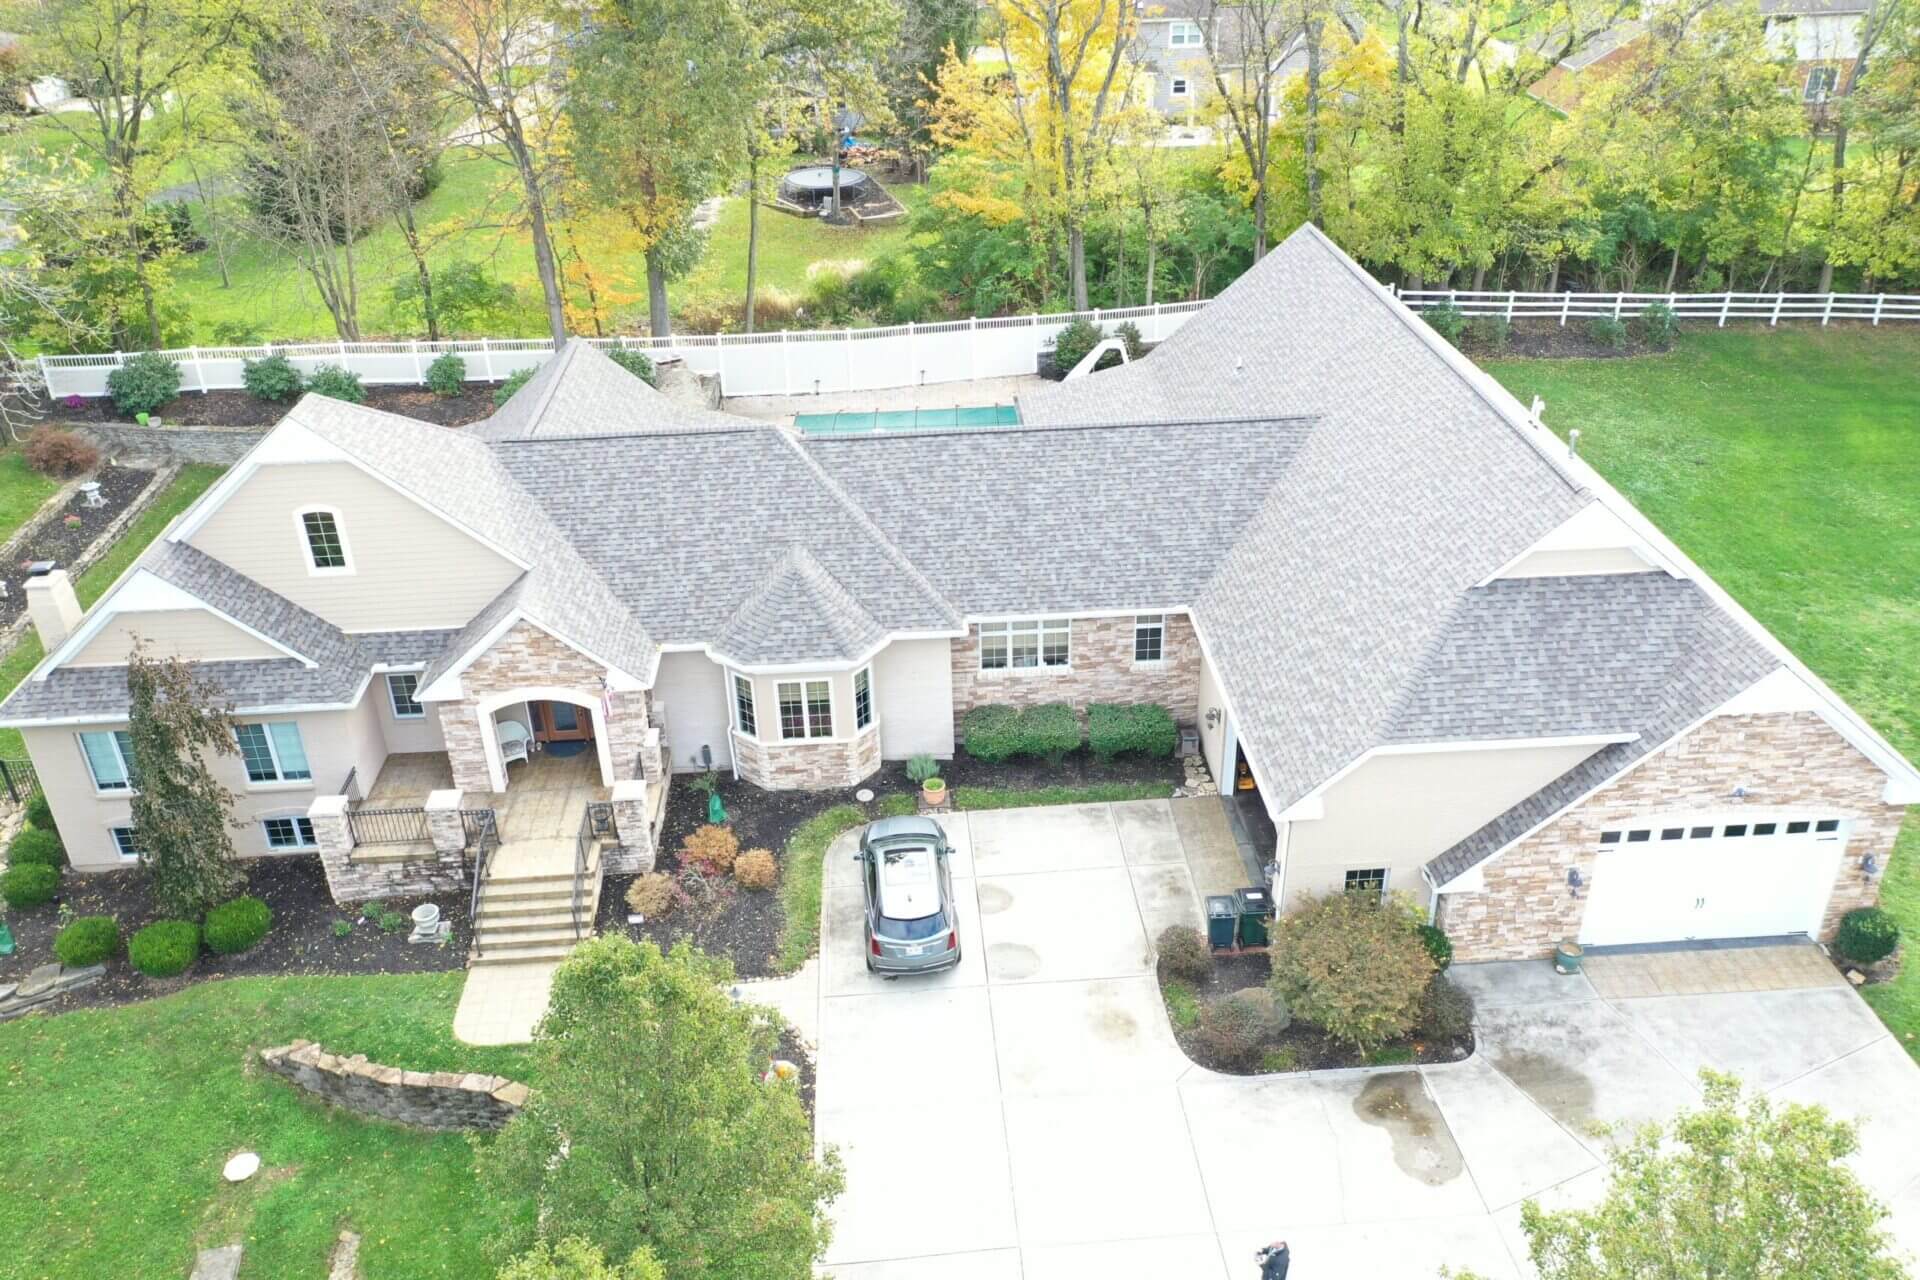 A aerial view of a house with a pool in the yard.